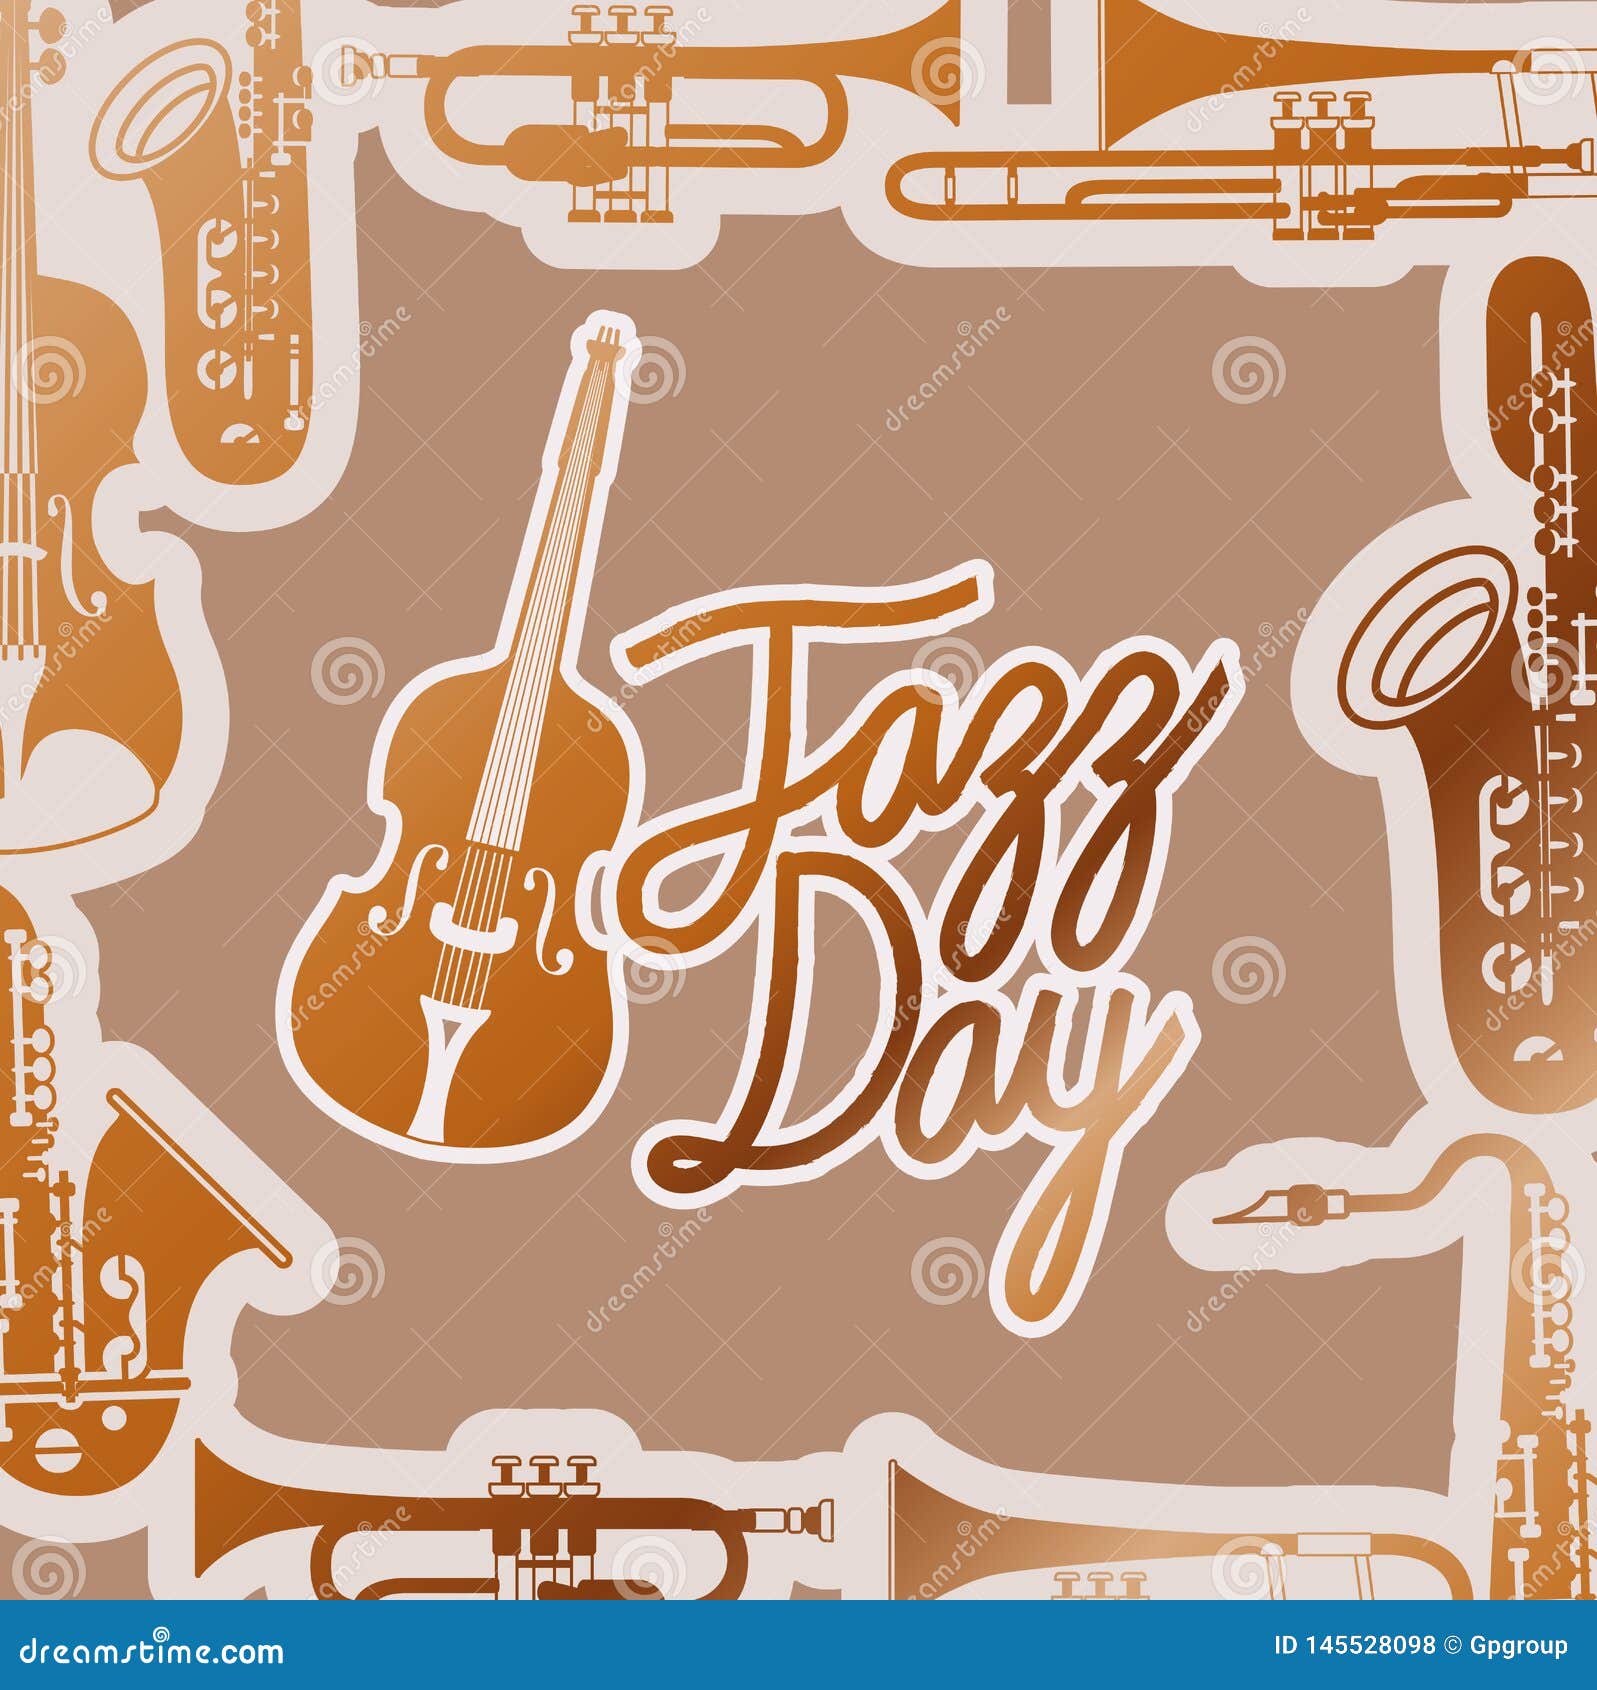 jazz day poster with fiddles